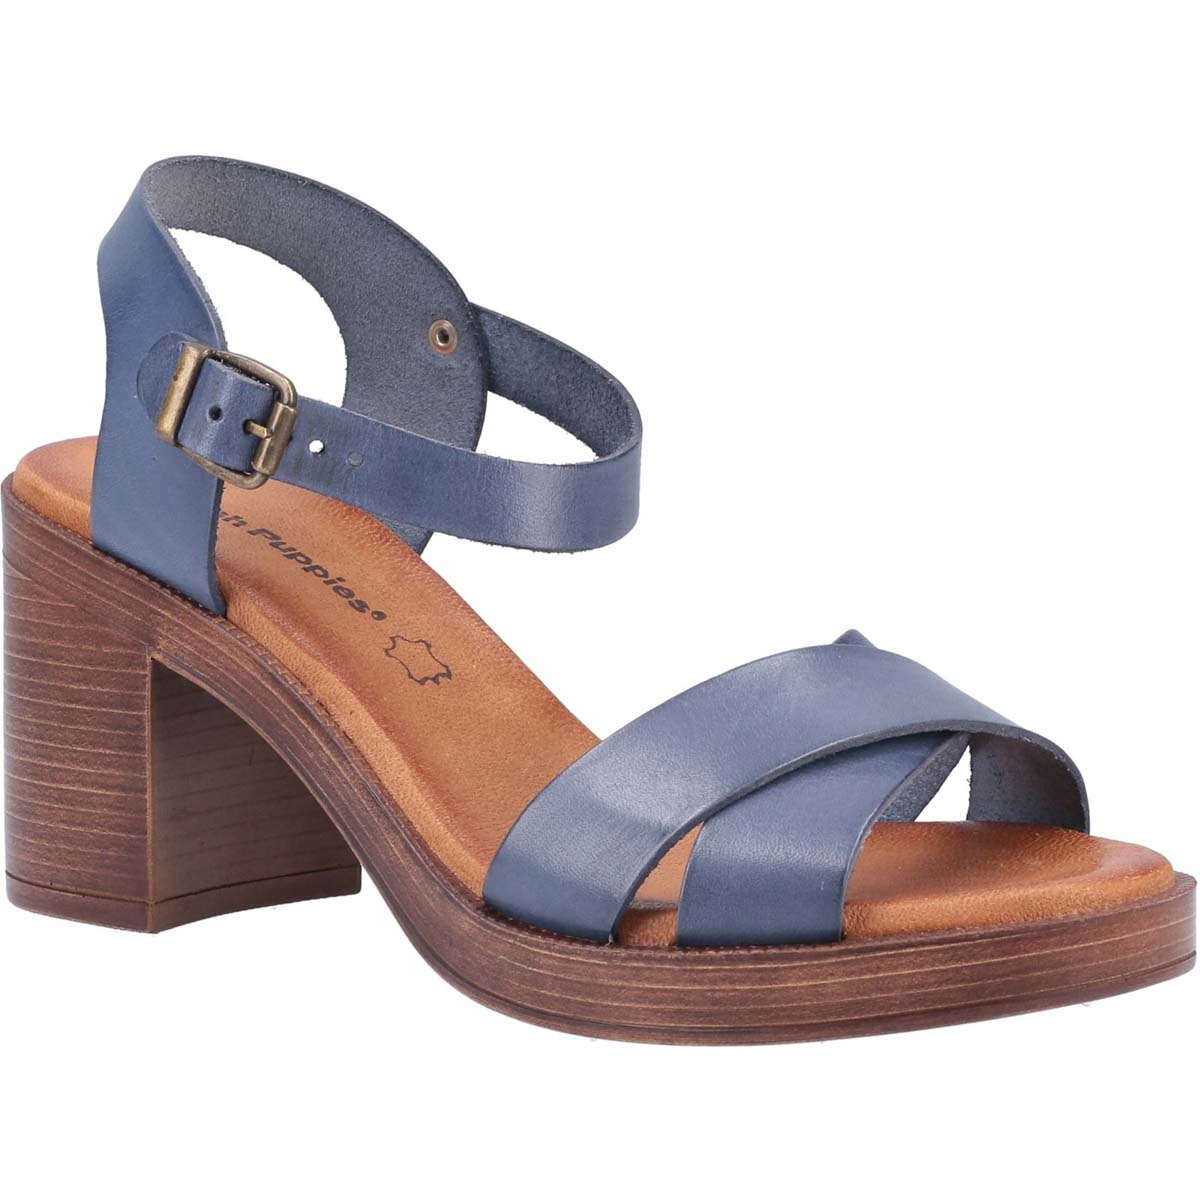 Hush Puppies Georgia Blue Womens Heeled Sandals 31949-54715 in a Plain Leather in Size 6